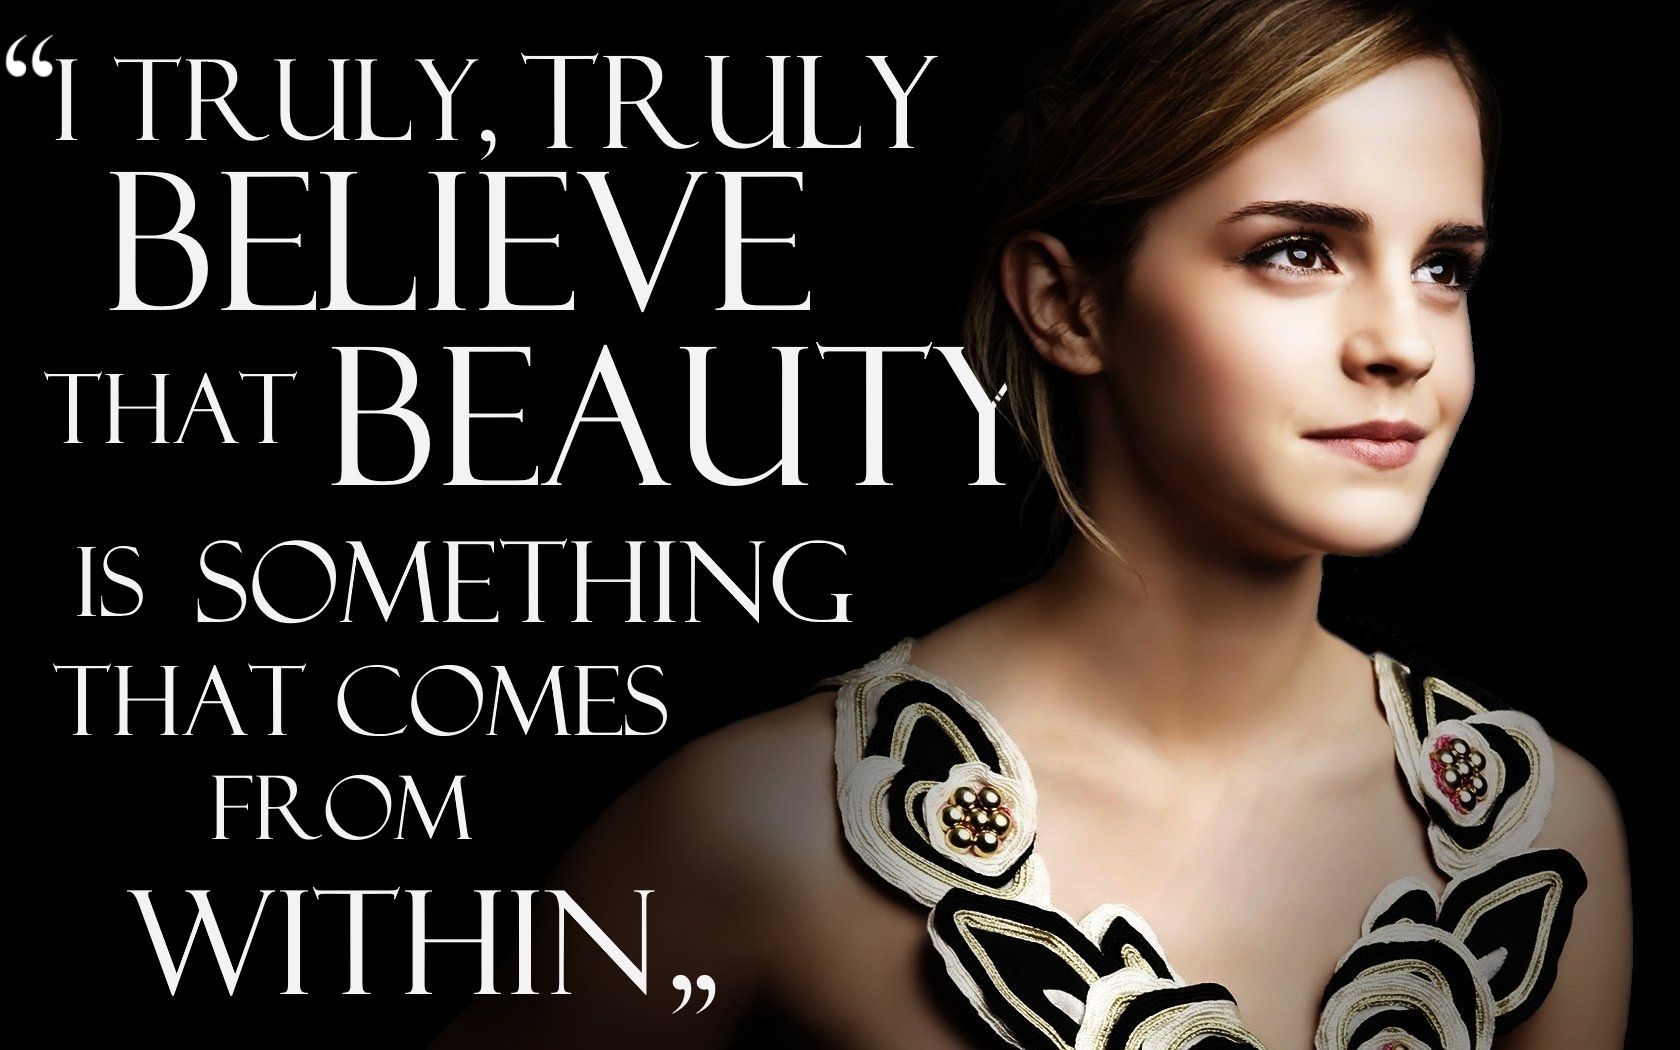 Celebrity Emma Watson Actresses United Kingdom Quote HD Wallpaper Background Image. United kingdom quotes, HD quotes, Emma watson wallpaper